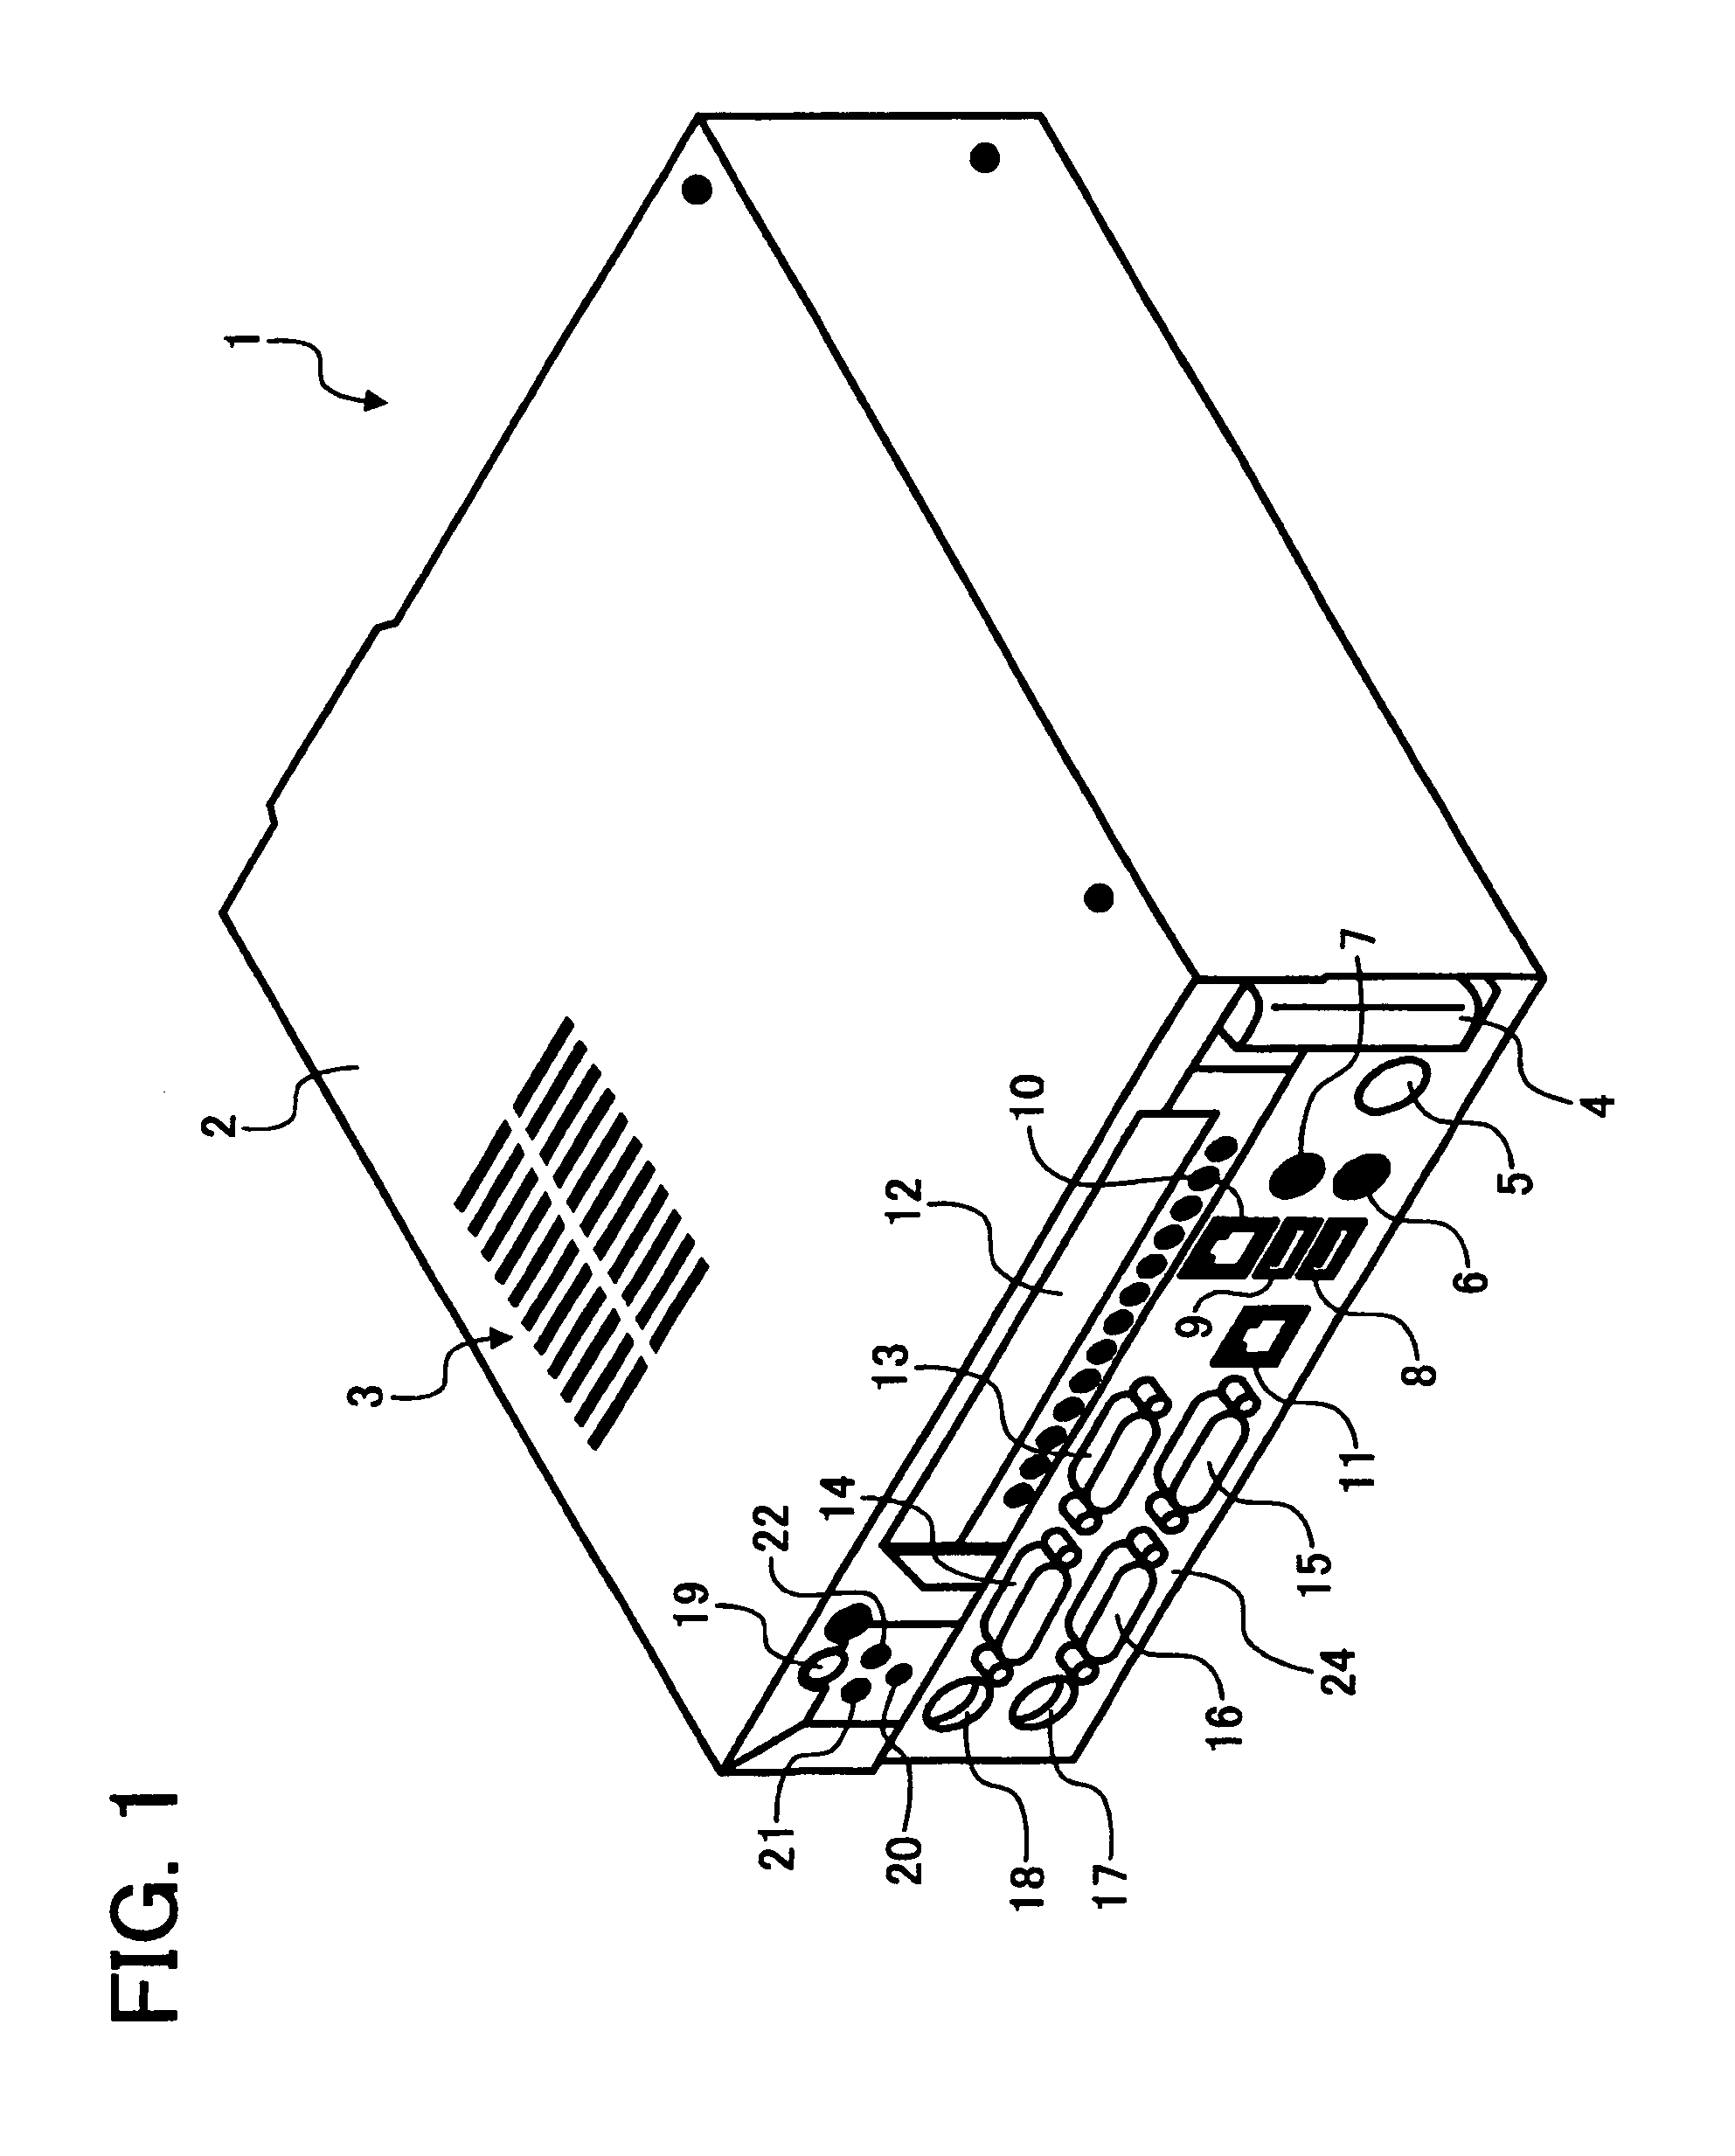 Storage device and method of efficiently arranging components in an information processing apparatus